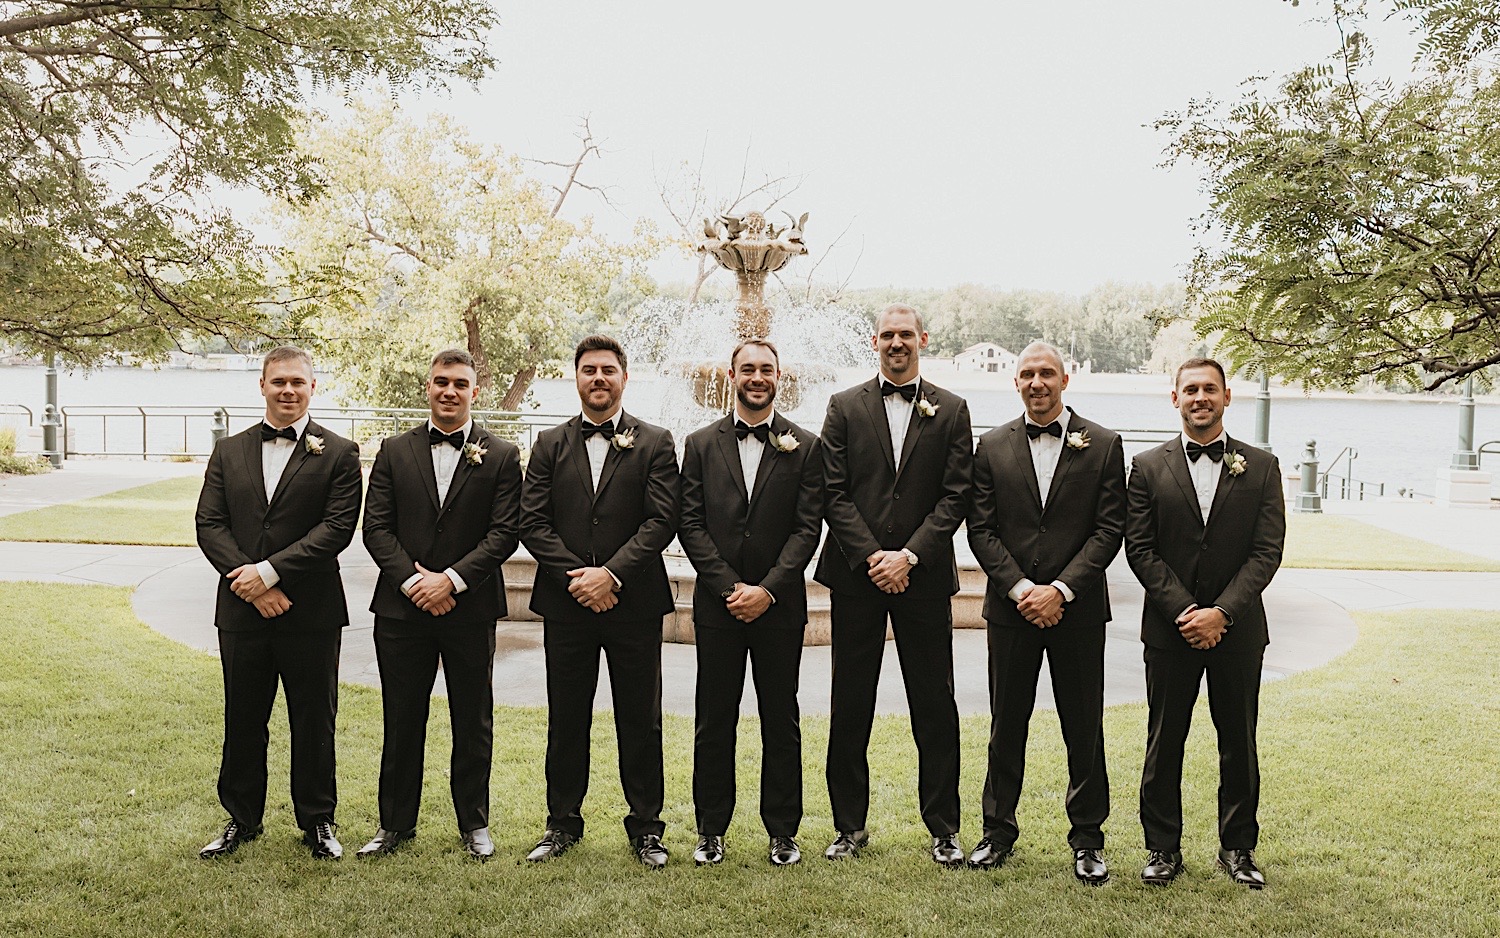 A groom and his groomsmen all smile and look at the camera while standing in front of a fountain